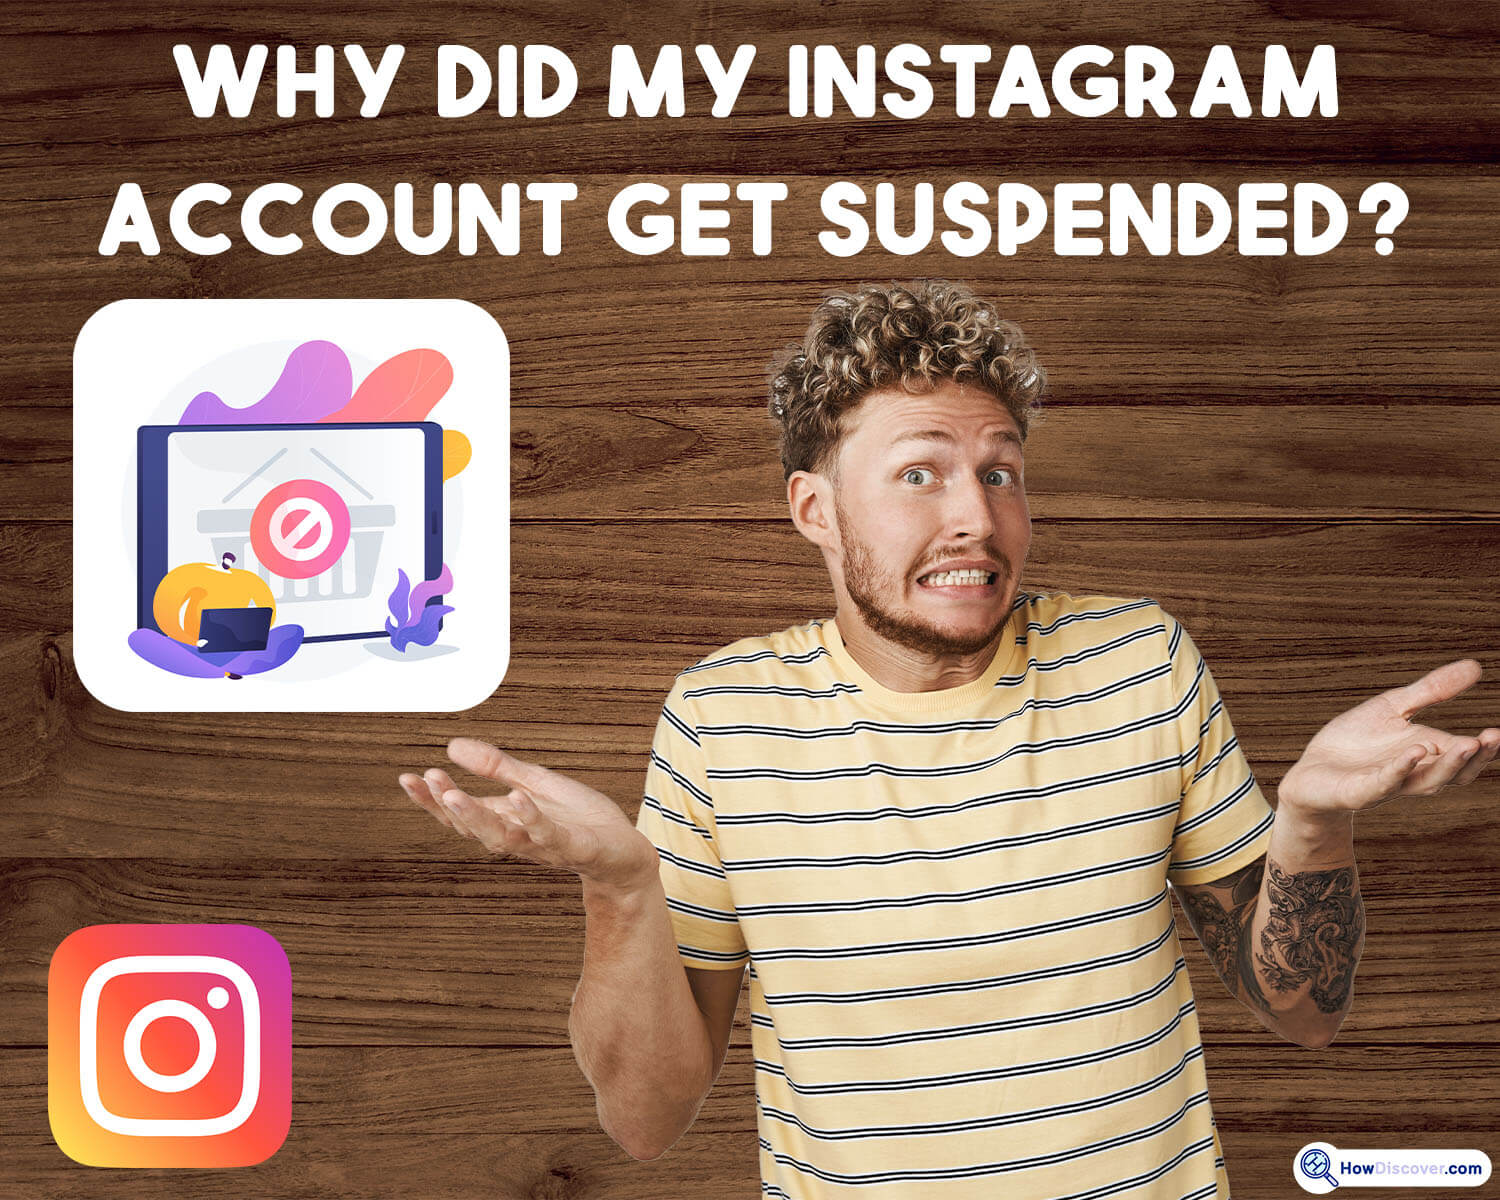 Why Did My Instagram Account Get Suspended